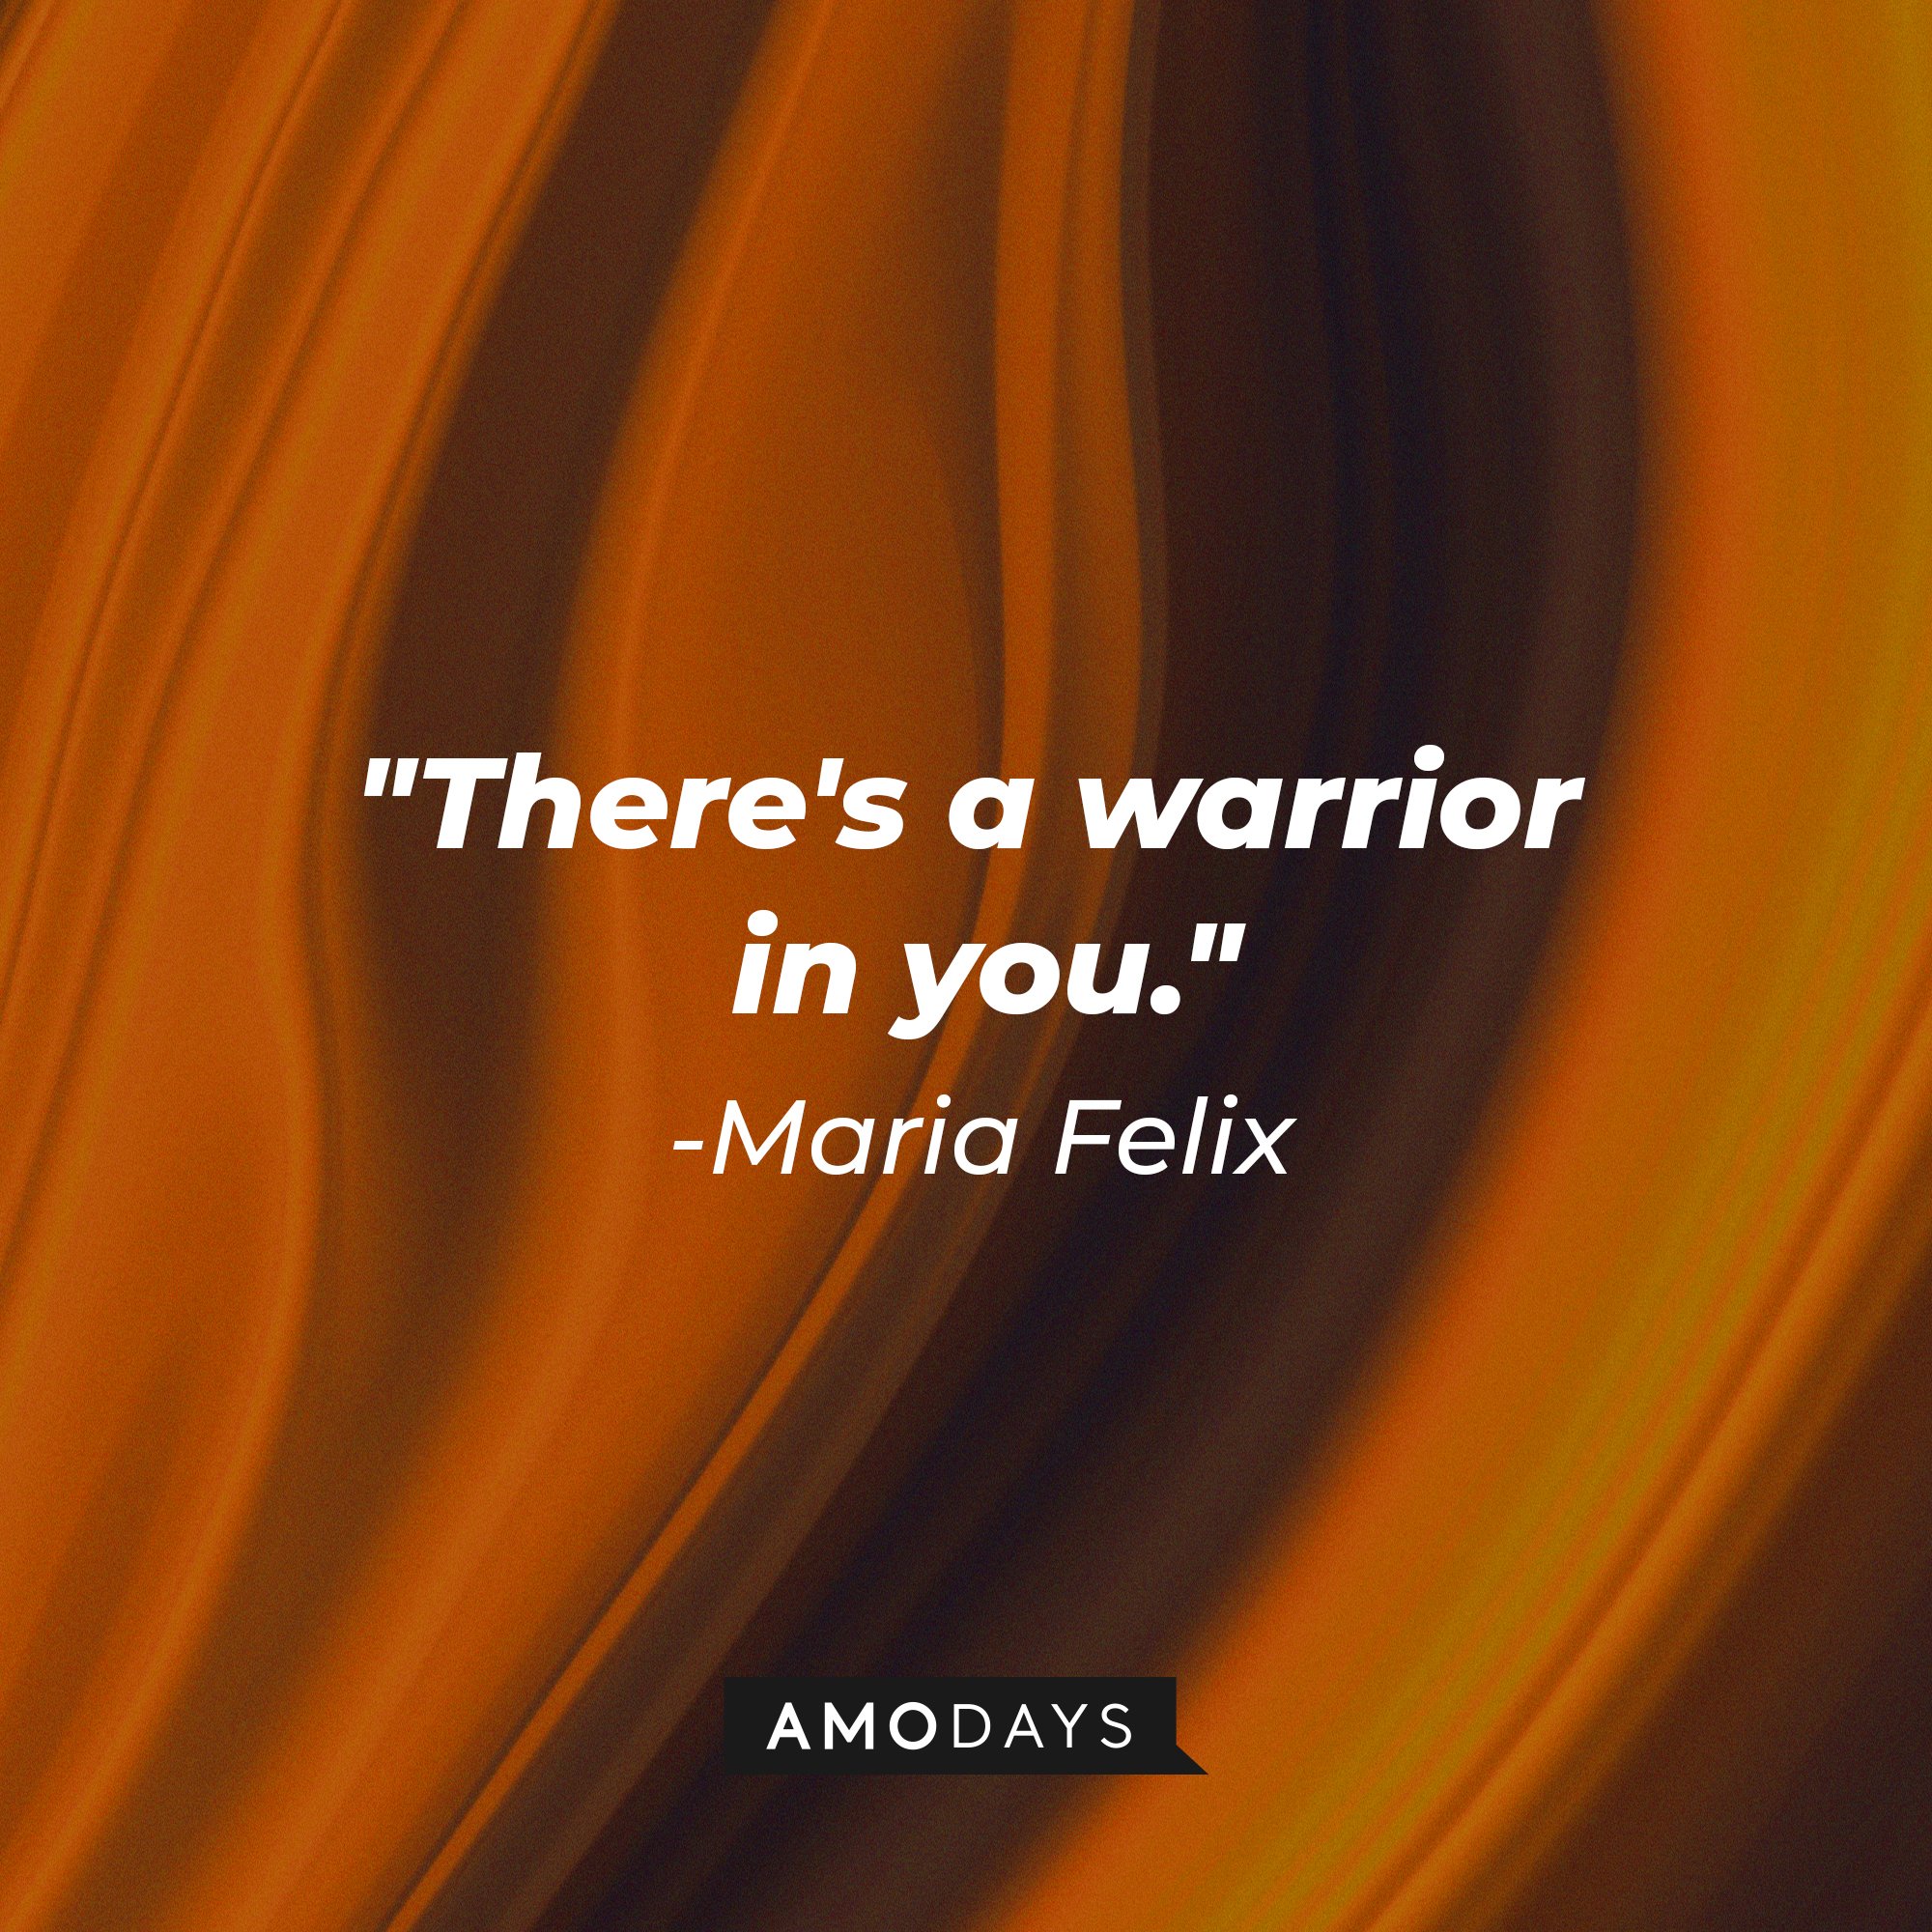 Maria Felix's quote: "There's a warrior in you." | Image: AmoDays